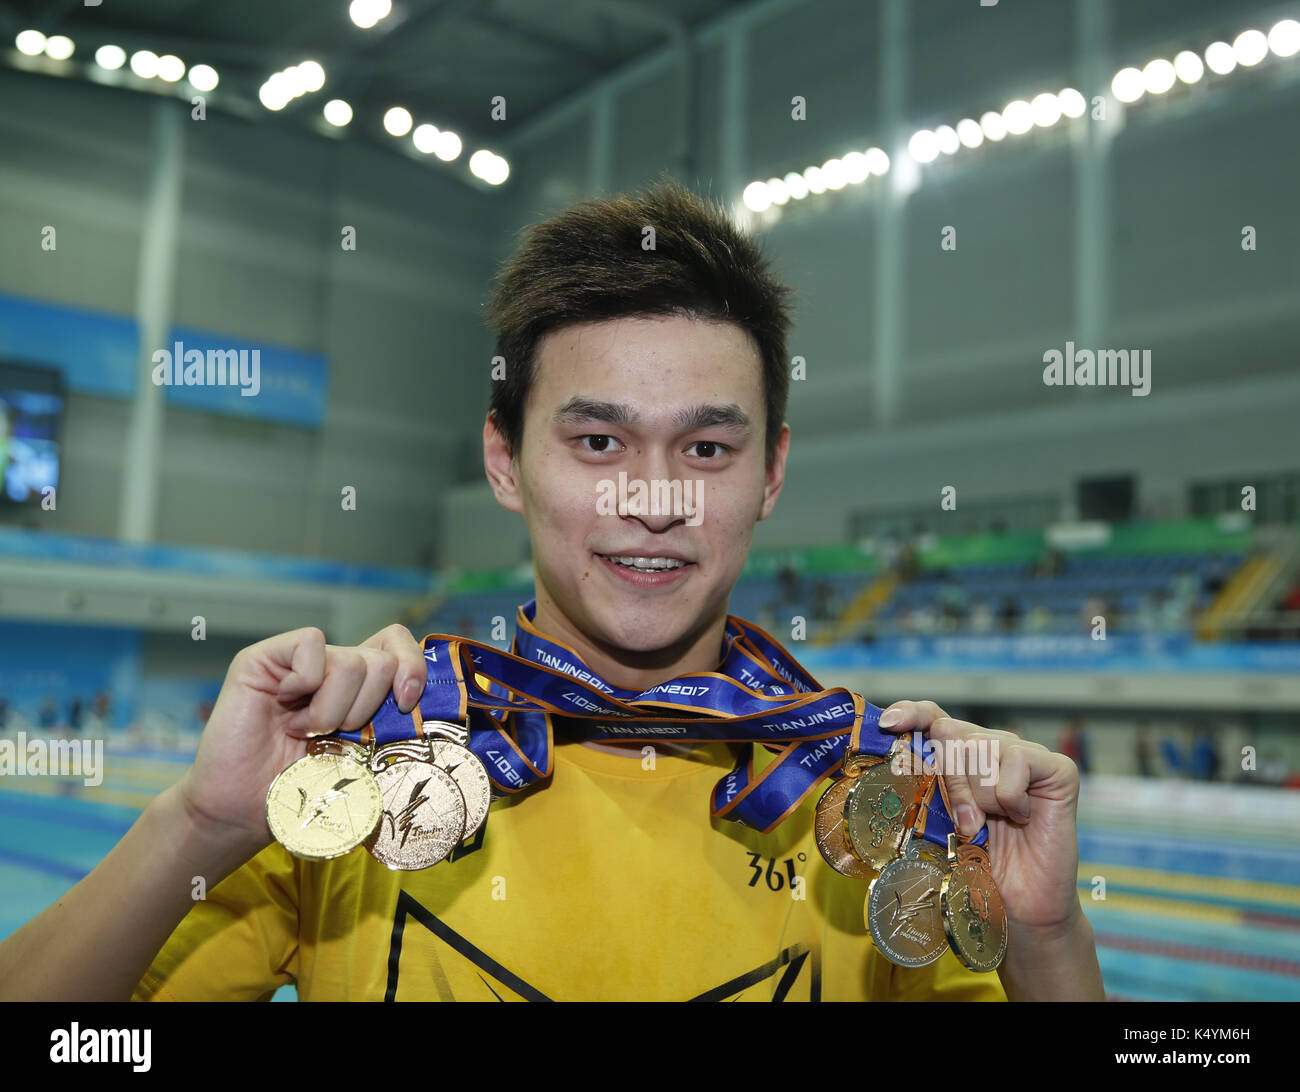 Tianjin. 7th Sep, 2017. Sun Yang of Zhejiang shows all his medals after the awarding ceremony of men's 4x100m medley relay final at 13th Chinese National Games in north China's Tianjin Municipality, Sept. 7, 2017. Sun Yang won six gold medals and one silver medal at 13th Chinese National Games. Credit: Fei Maohua/Xinhua/Alamy Live News Stock Photo